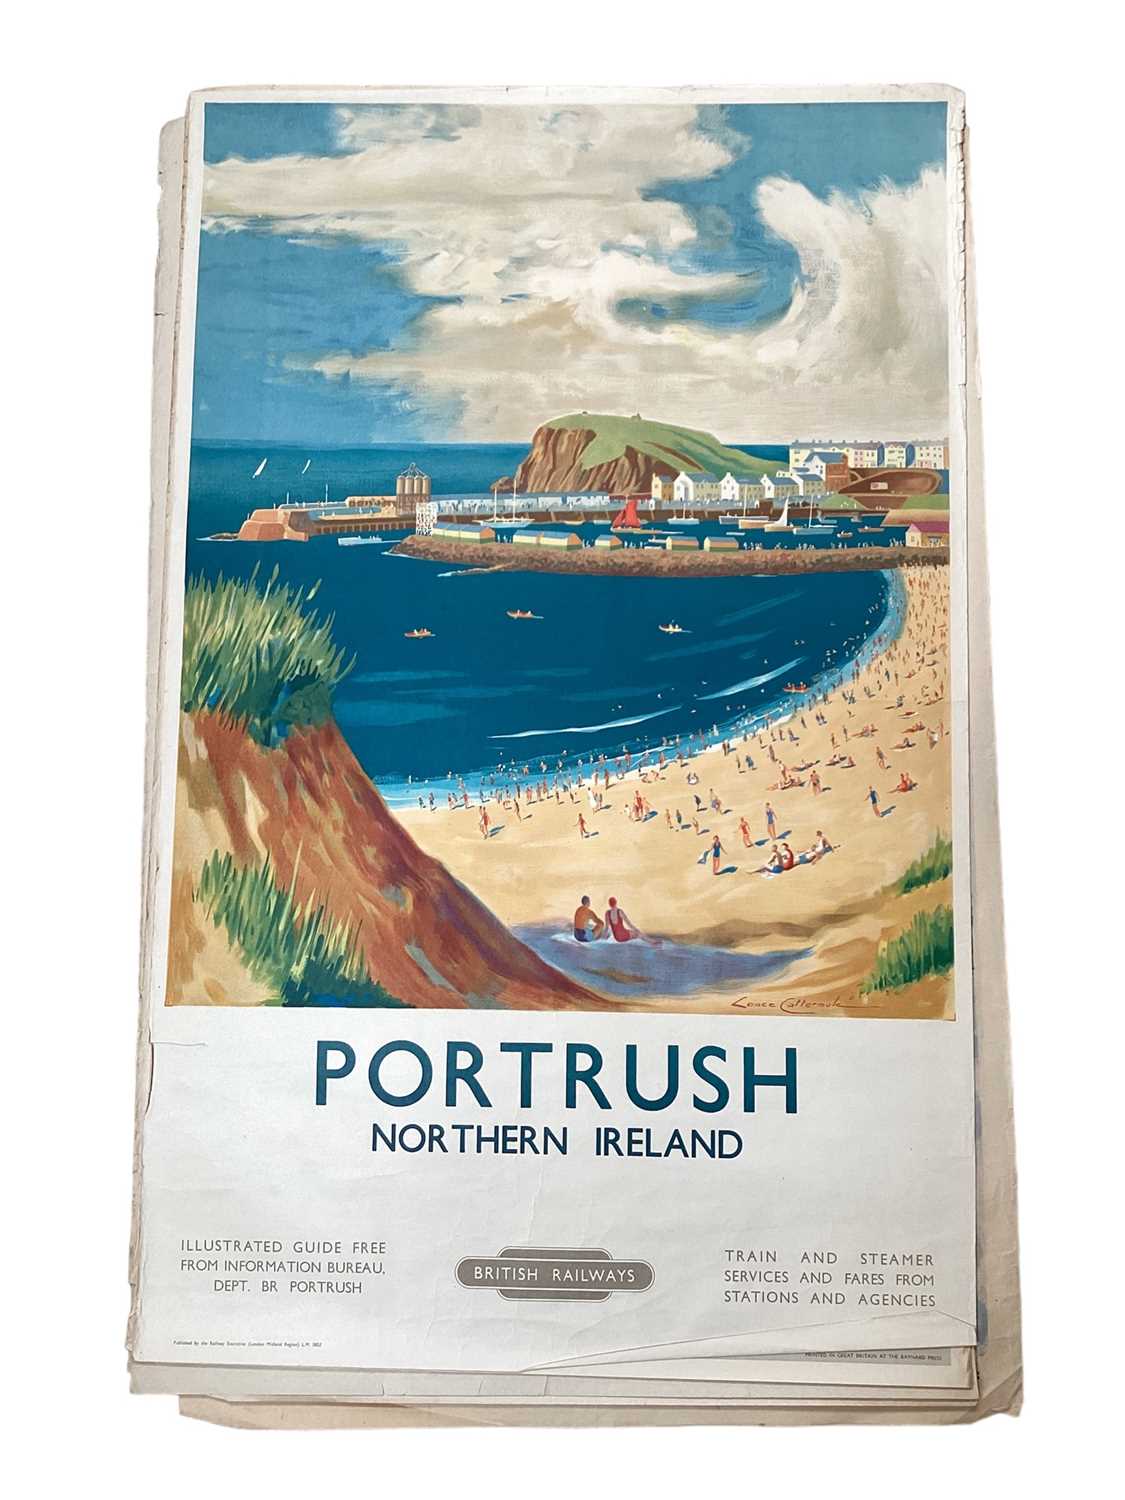 Original British Railways poster for Portrush, with artwork by Lance Cattermole, printed by Jordison